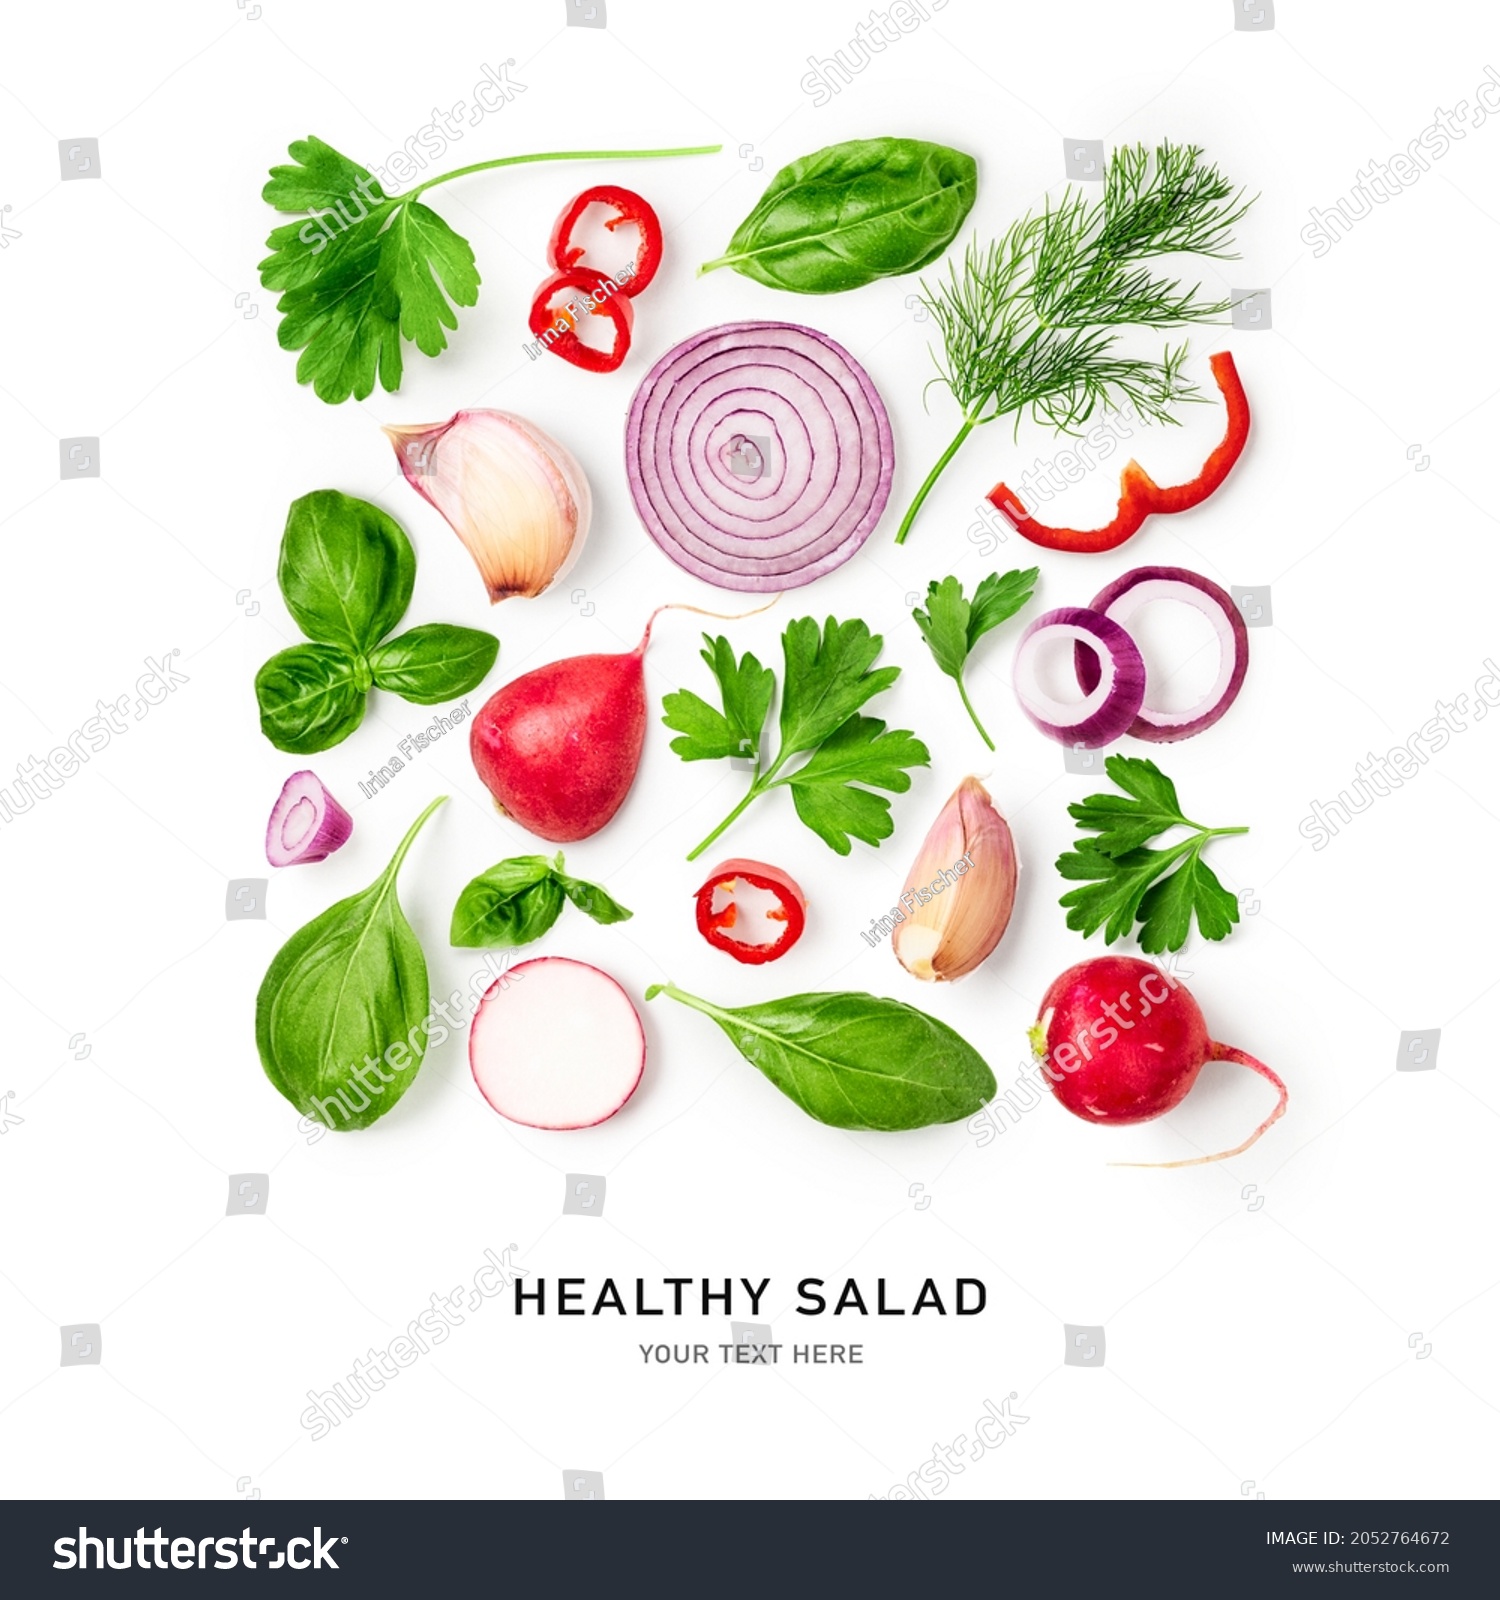 Red pepper, basil leaves, onion, radish, parsley and garlic creative pattern isolated on white background. Healthy eating and food concept. Fresh salad vegetables. Top view, flat lay, design element
 #2052764672